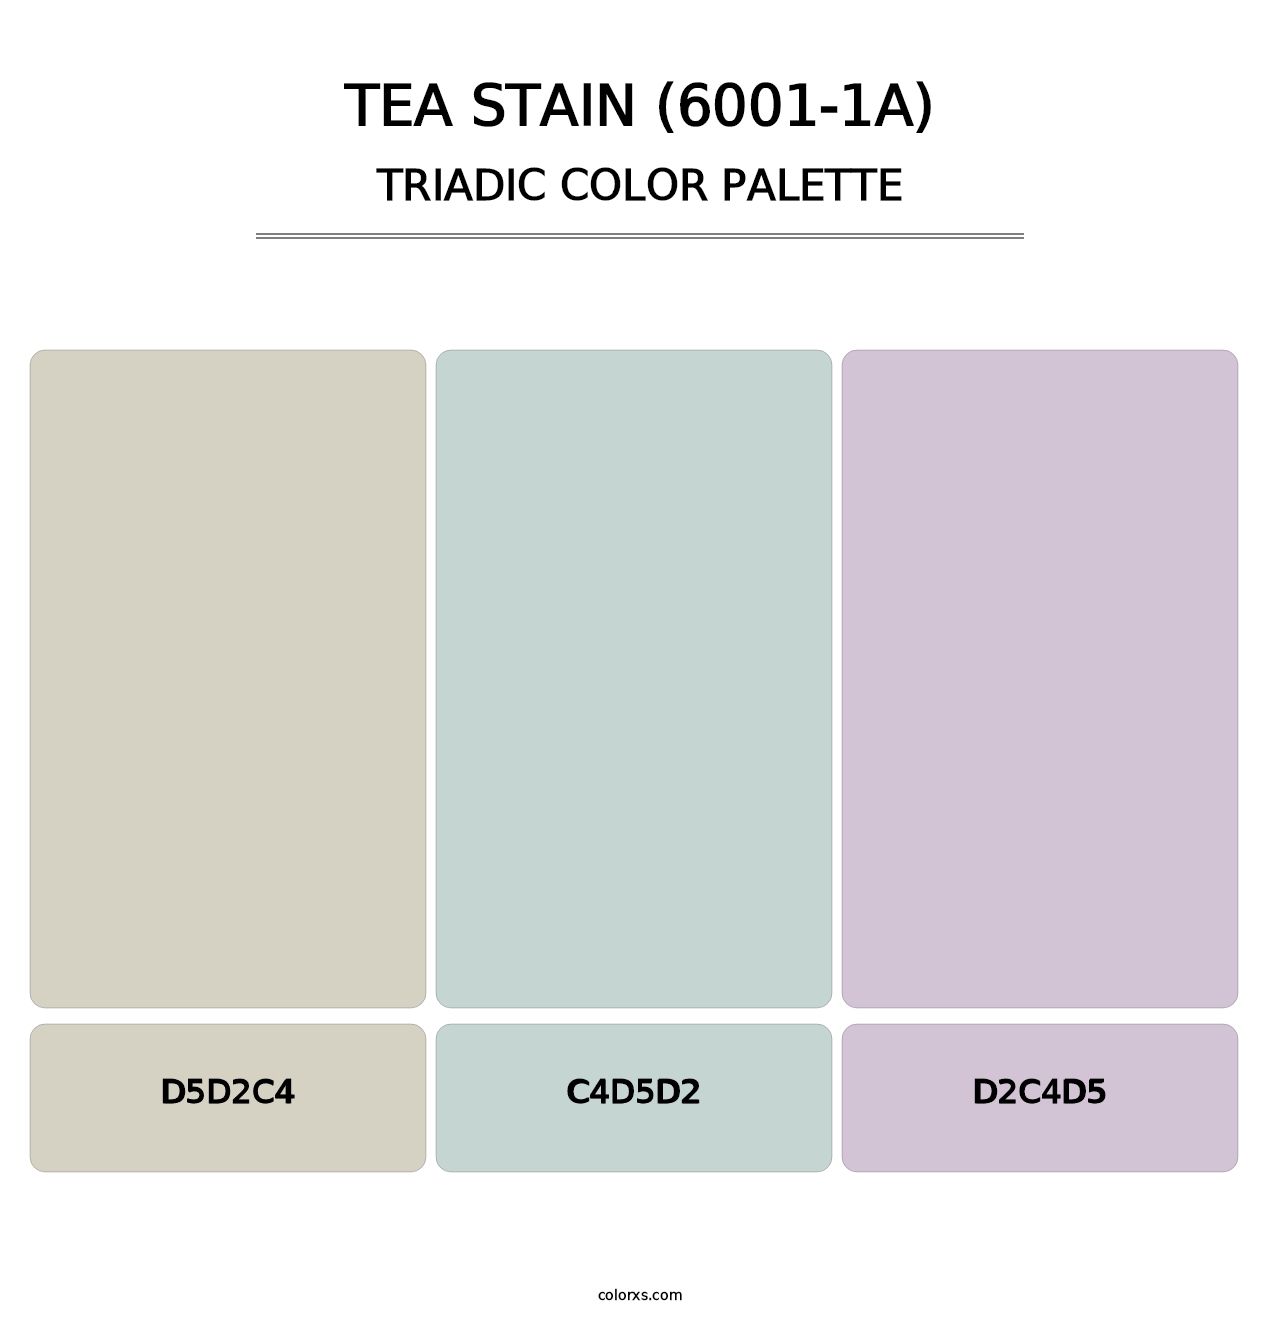 Tea Stain (6001-1A) - Triadic Color Palette